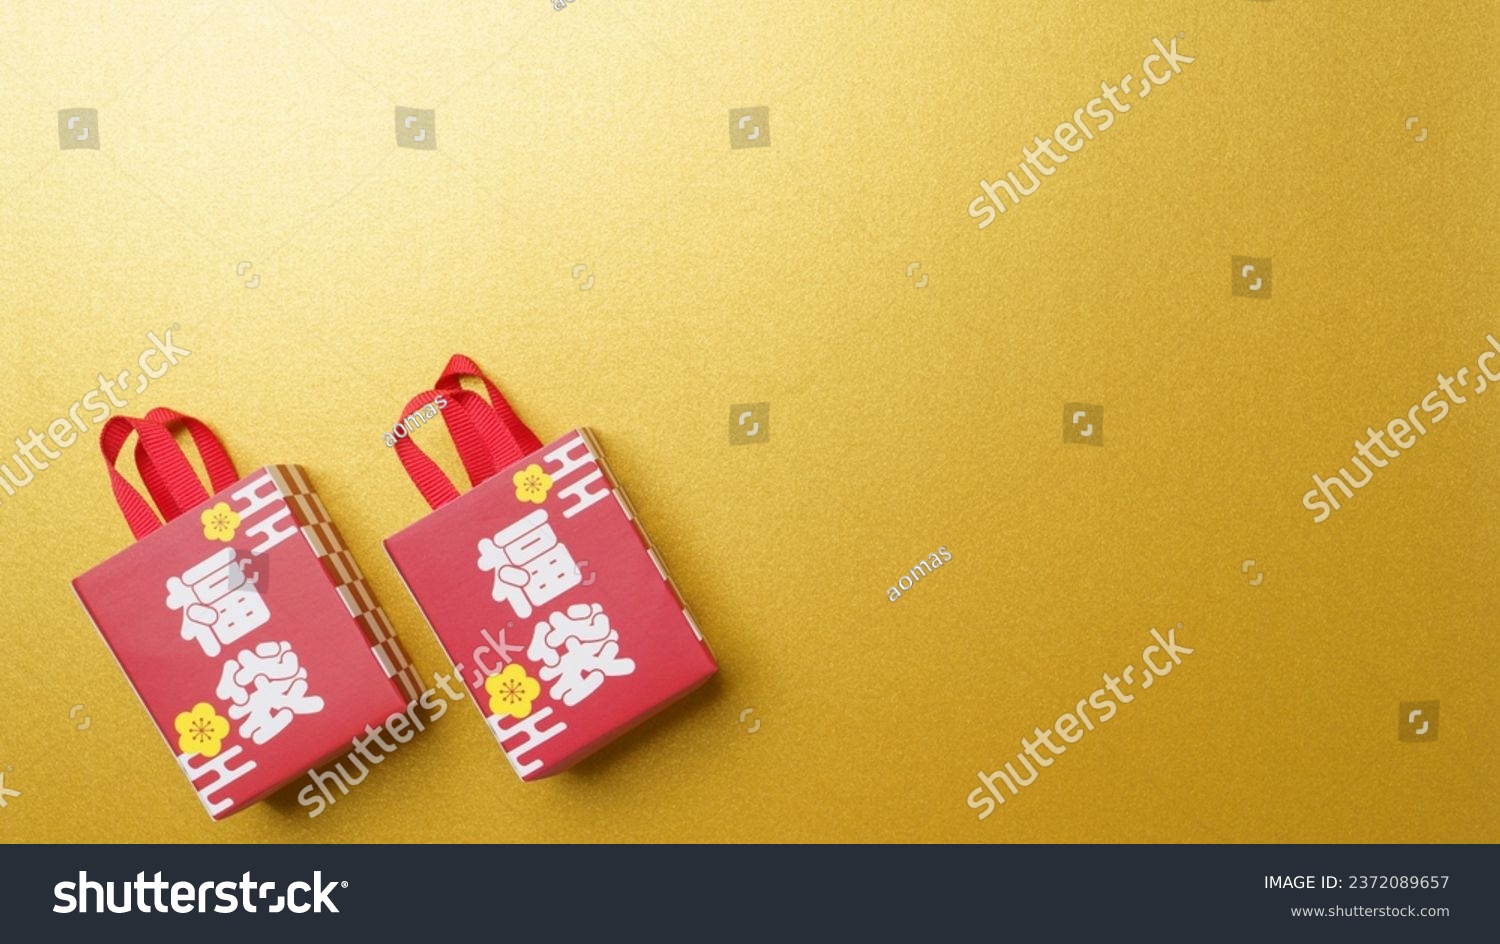 The characters for "Lucky bag" are written in Japanese.Gold background.Japanese lucky bag.An image of Japanese New Year. #2372089657